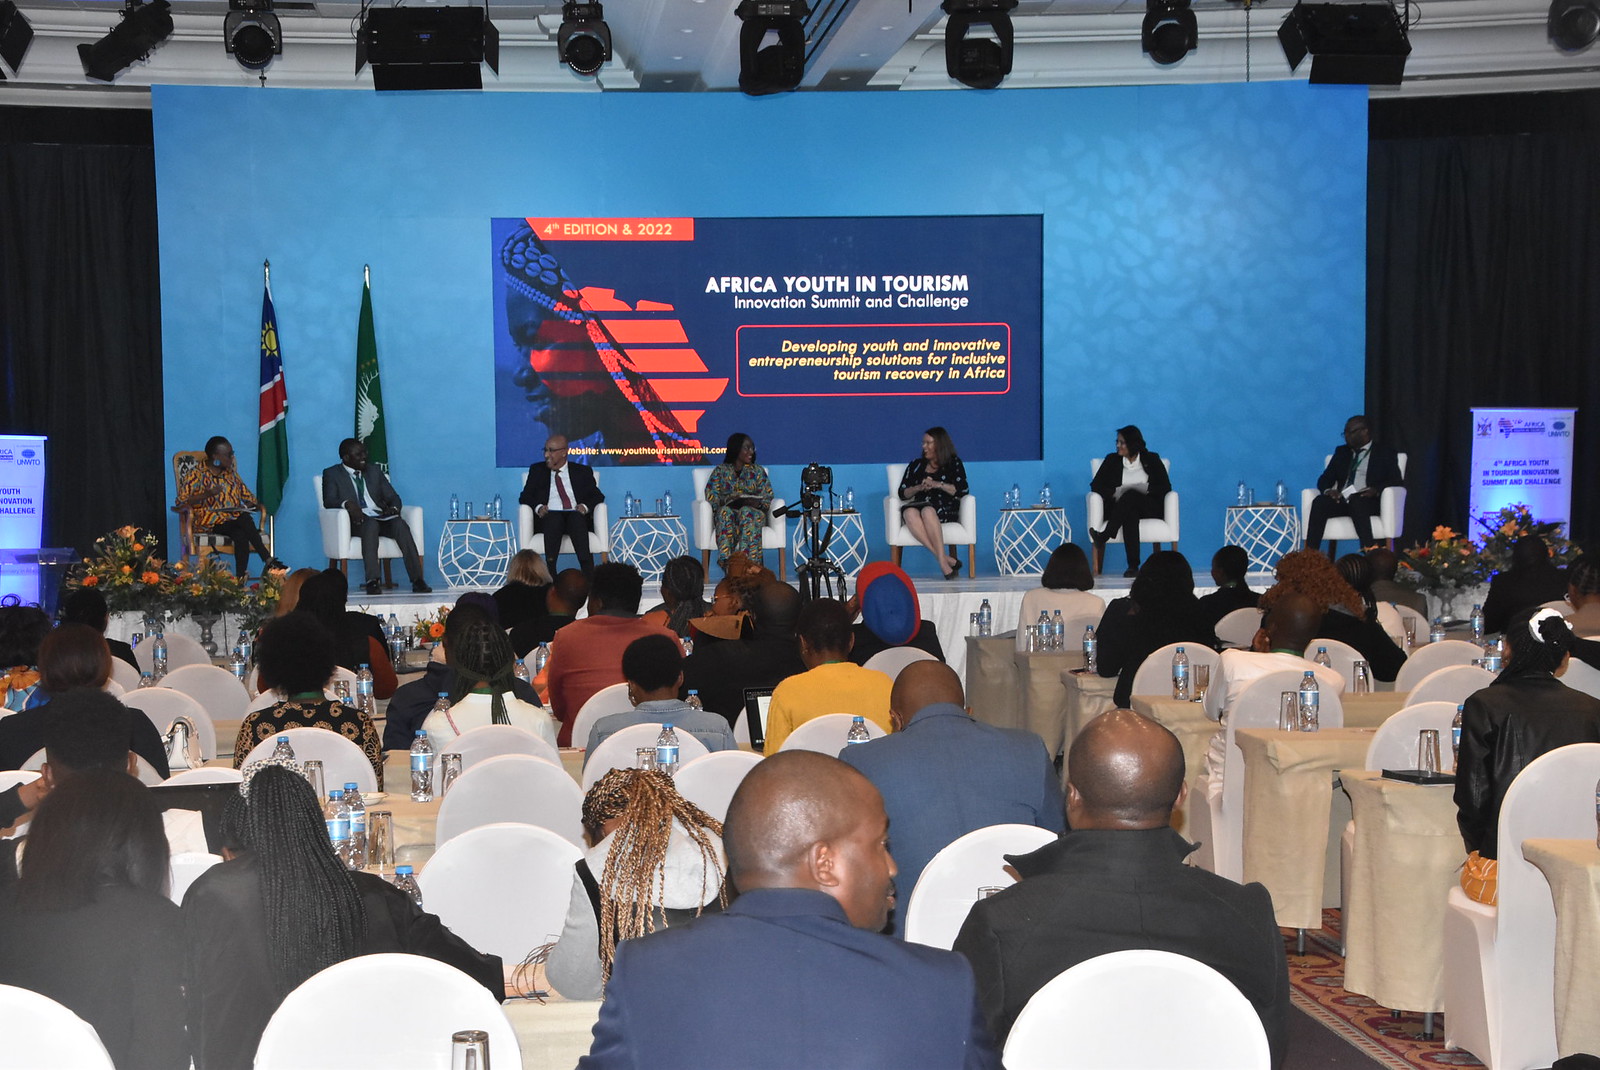 Africa Youth in Tourism Innovation Summit: Thought leadership and Ministerial Roundtable Session